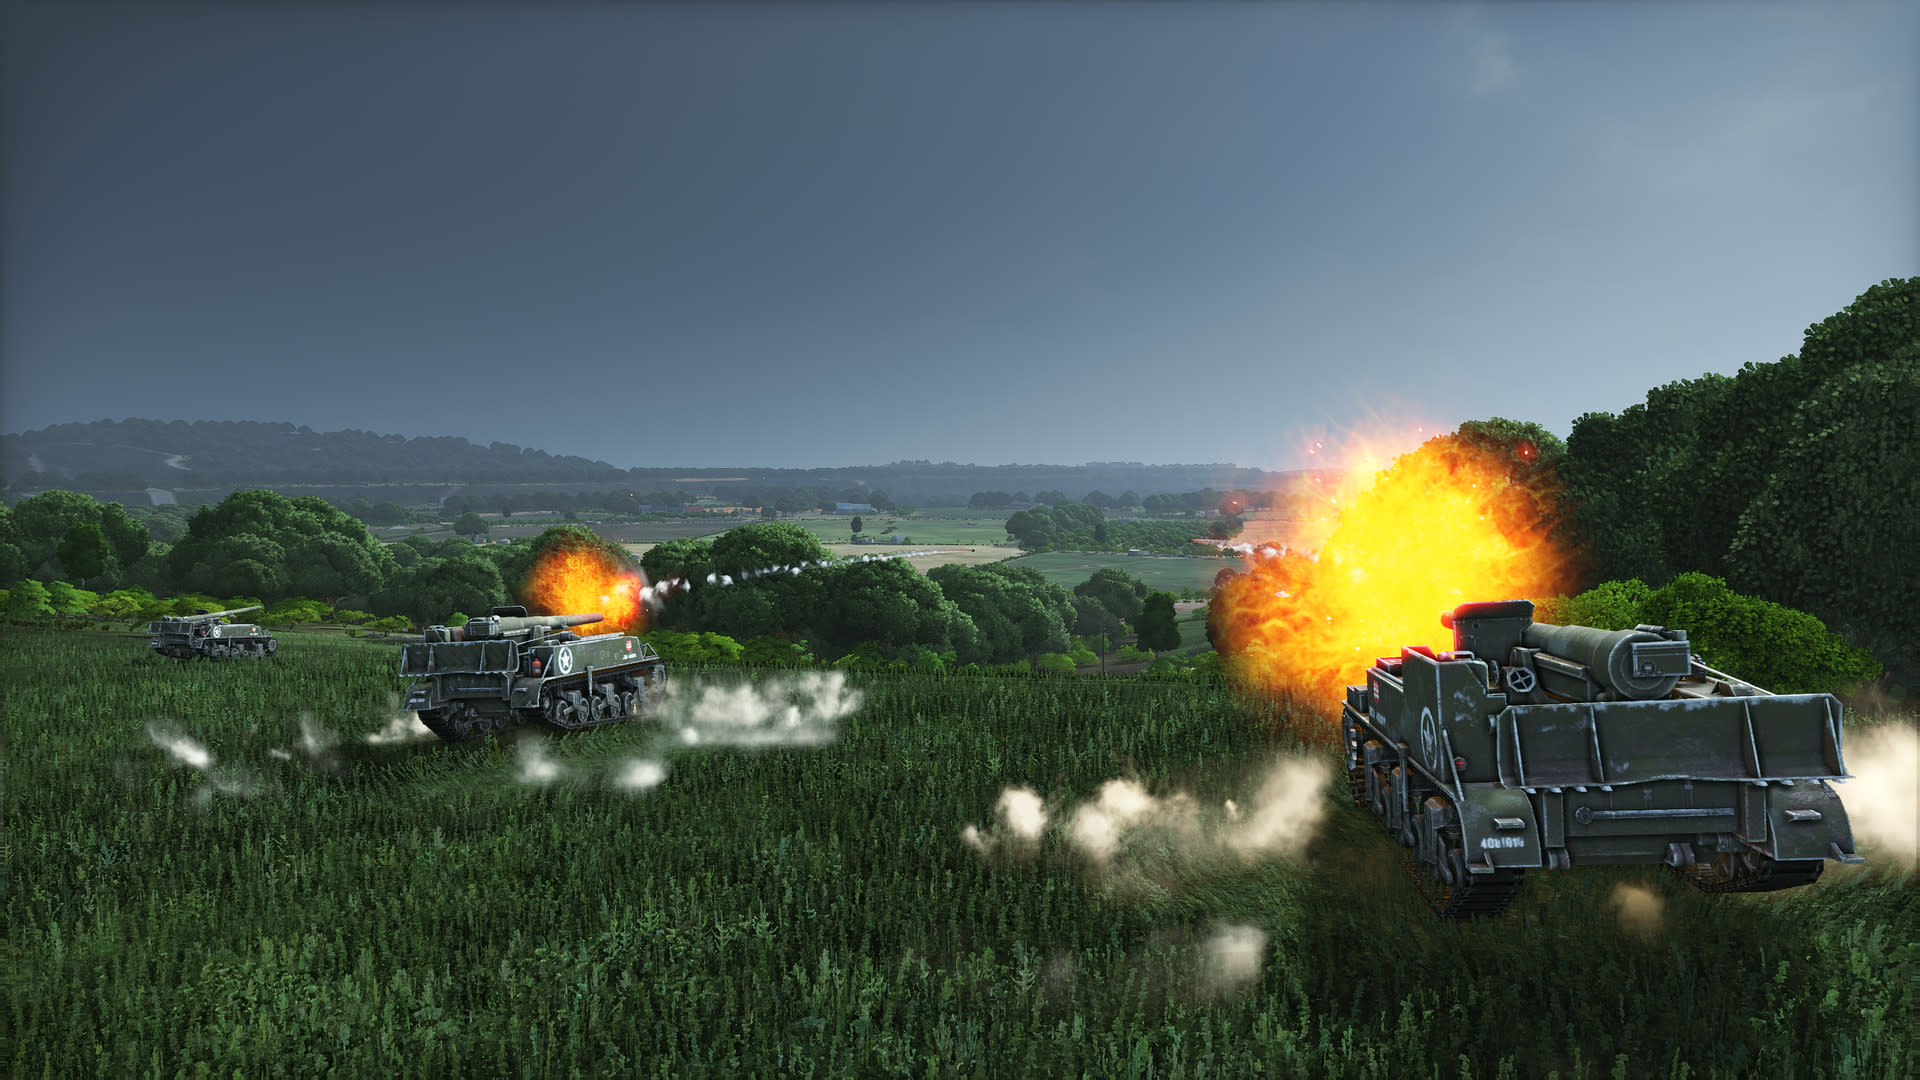 Steel Division: Normandy 44 - Second Wave (screenshot 3)